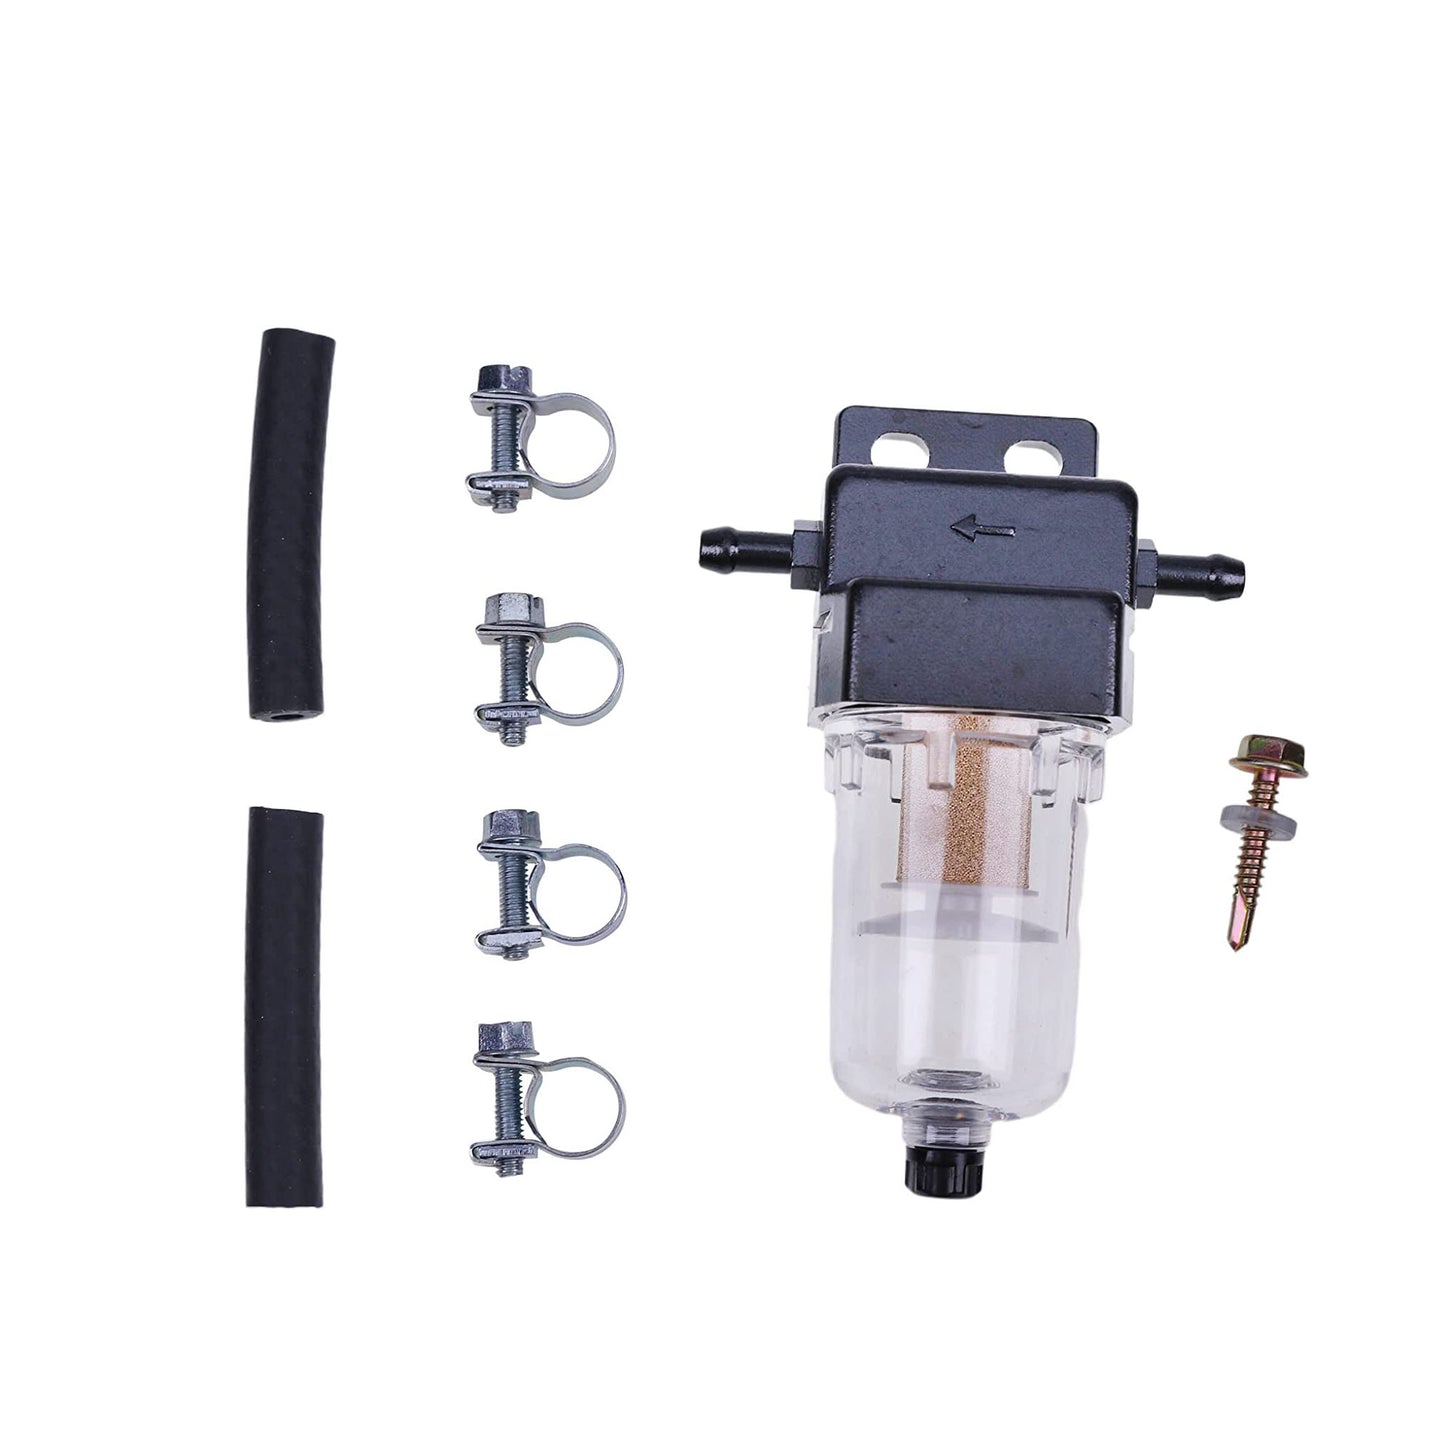 New Fuel Water Separator Assy Bronze Fuel Filter Element Kit 6mm Outlet and Inlet with Hoses and Clamps Compatible with Webasto Eberspacher Diesel Parking Heaters